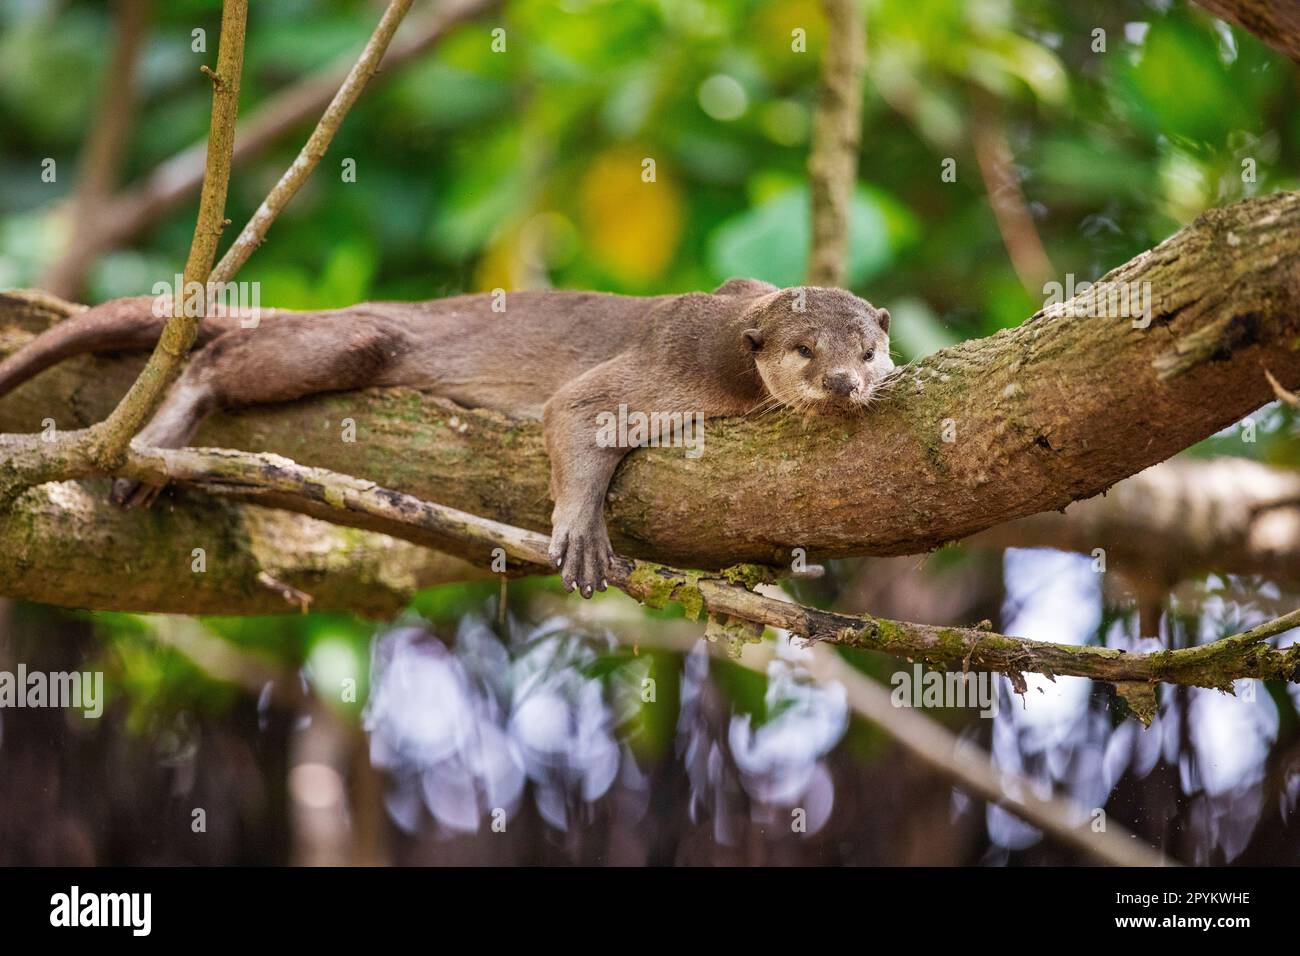 Smooth coated otter lying on a tree branch above a mangrove beach, Singapore Stock Photo